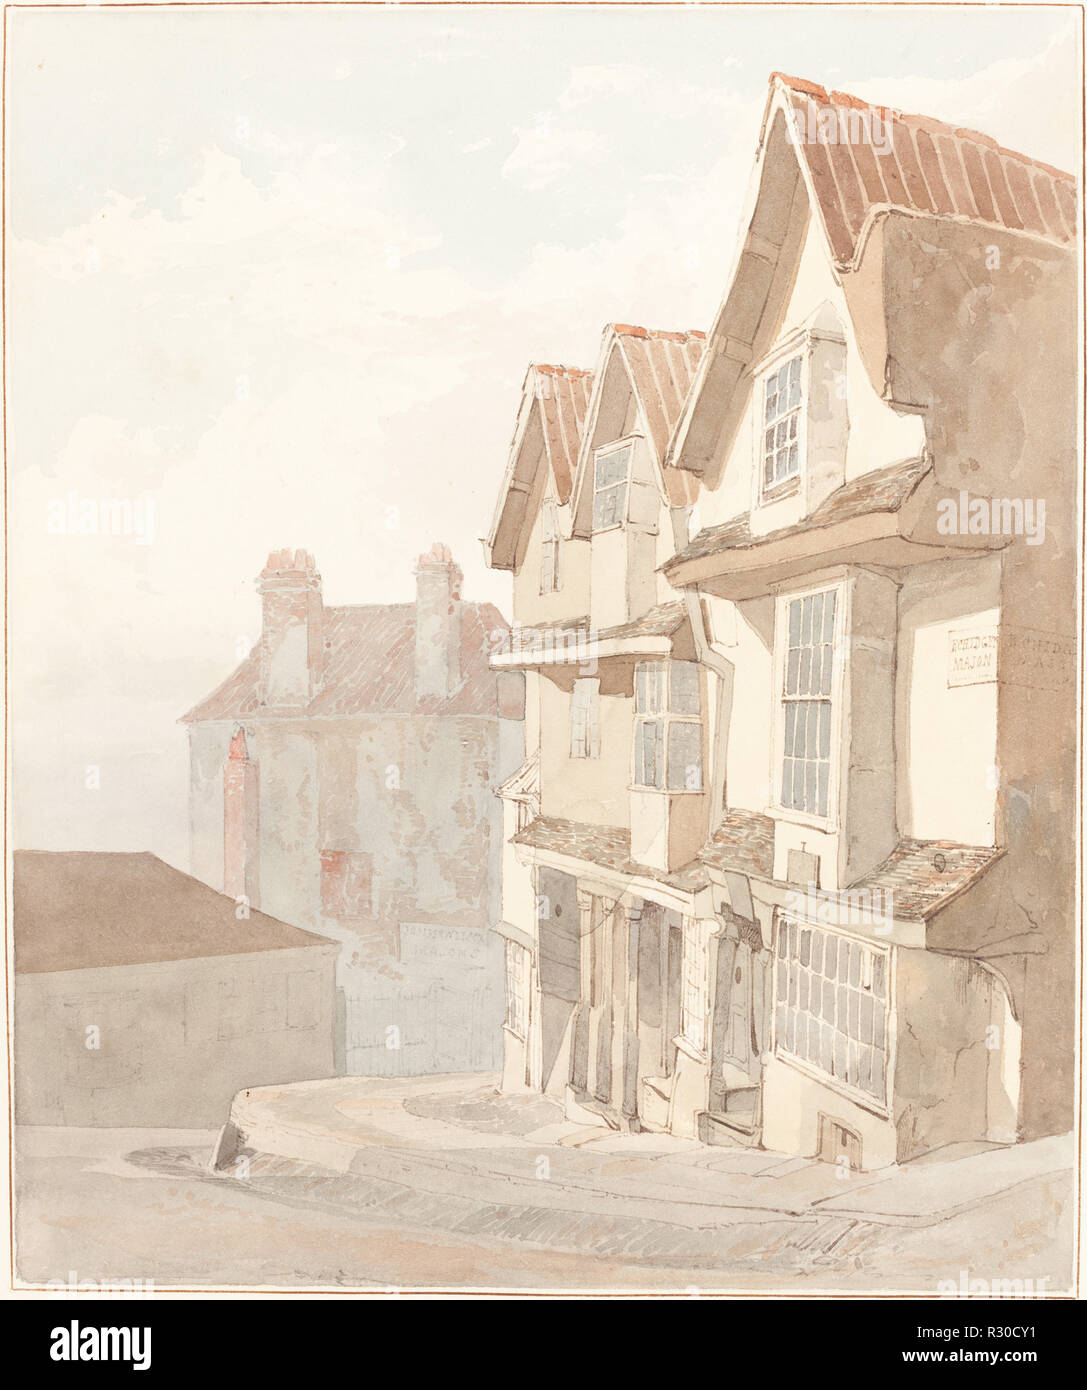 Street with Buildings. Dimensions: Overall (approximate): 25.5 x 21.2 cm (10 1/16 x 8 3/8 in.)  support: 43.4 x 34.2 cm (17 1/16 x 13 7/16 in.). Medium: watercolor. Museum: National Gallery of Art, Washington DC. Author: Attributed to Robert Dixon. Stock Photo